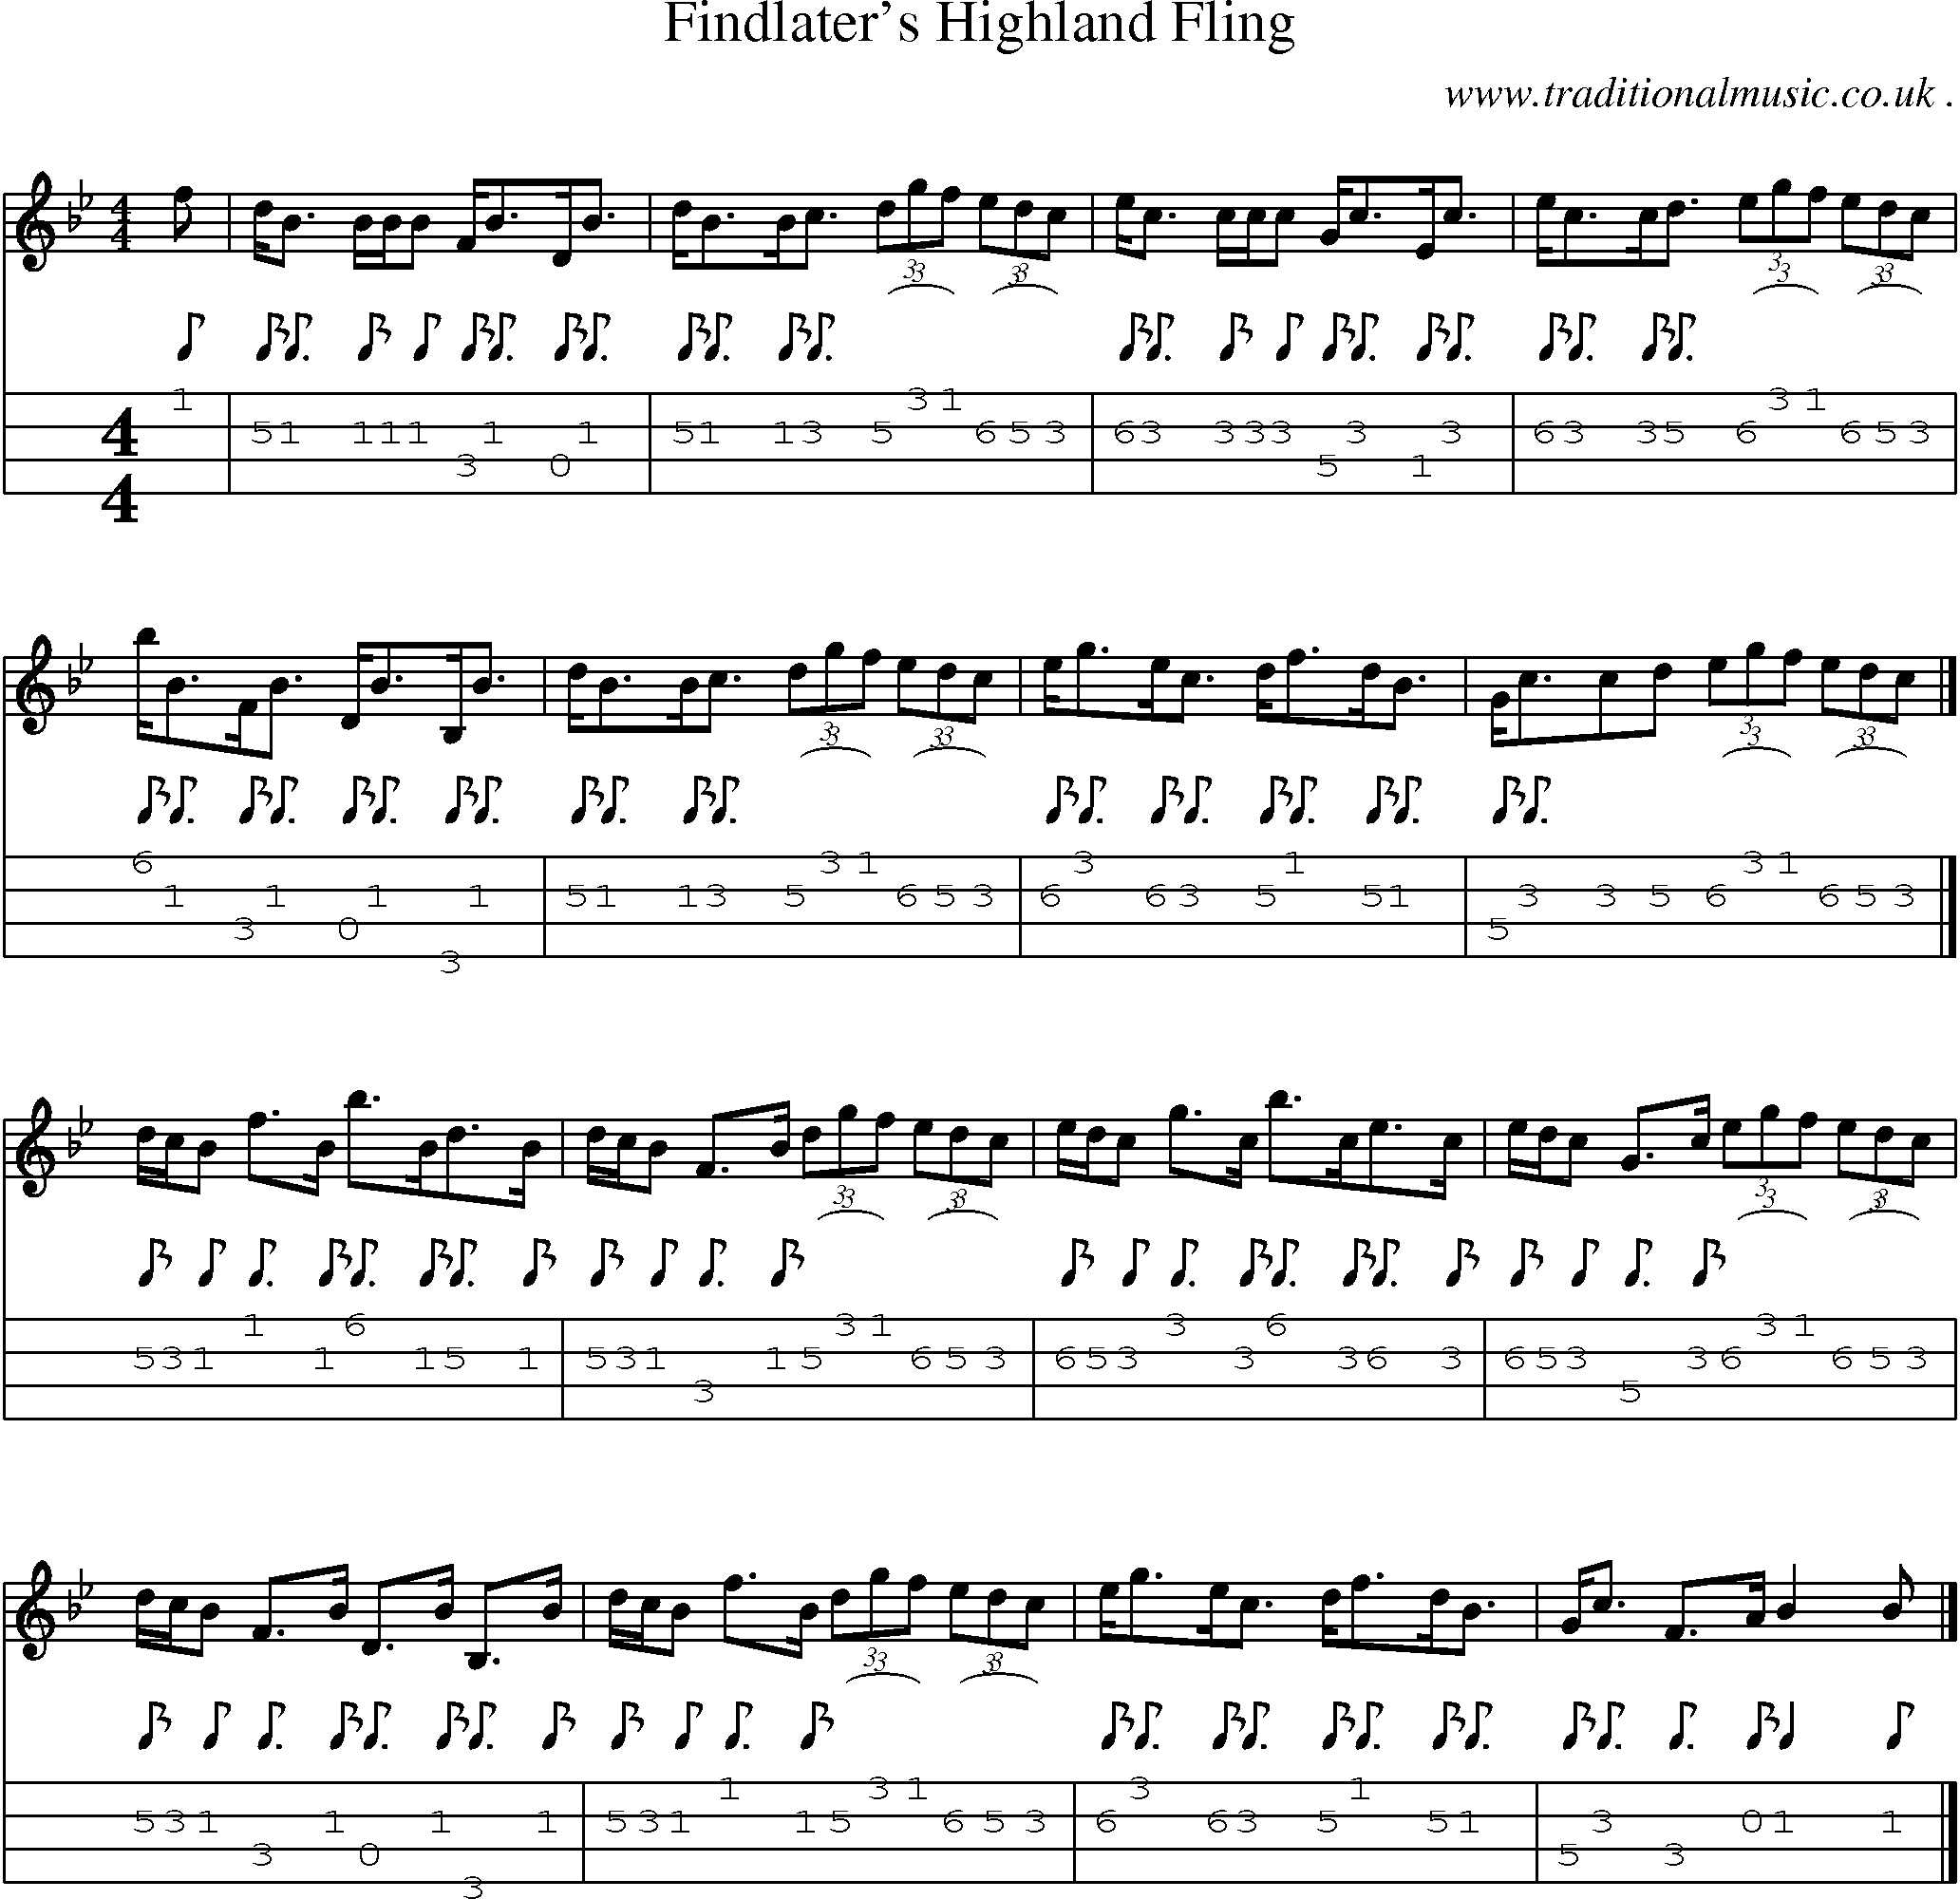 Sheet-music  score, Chords and Mandolin Tabs for Findlaters Highland Fling